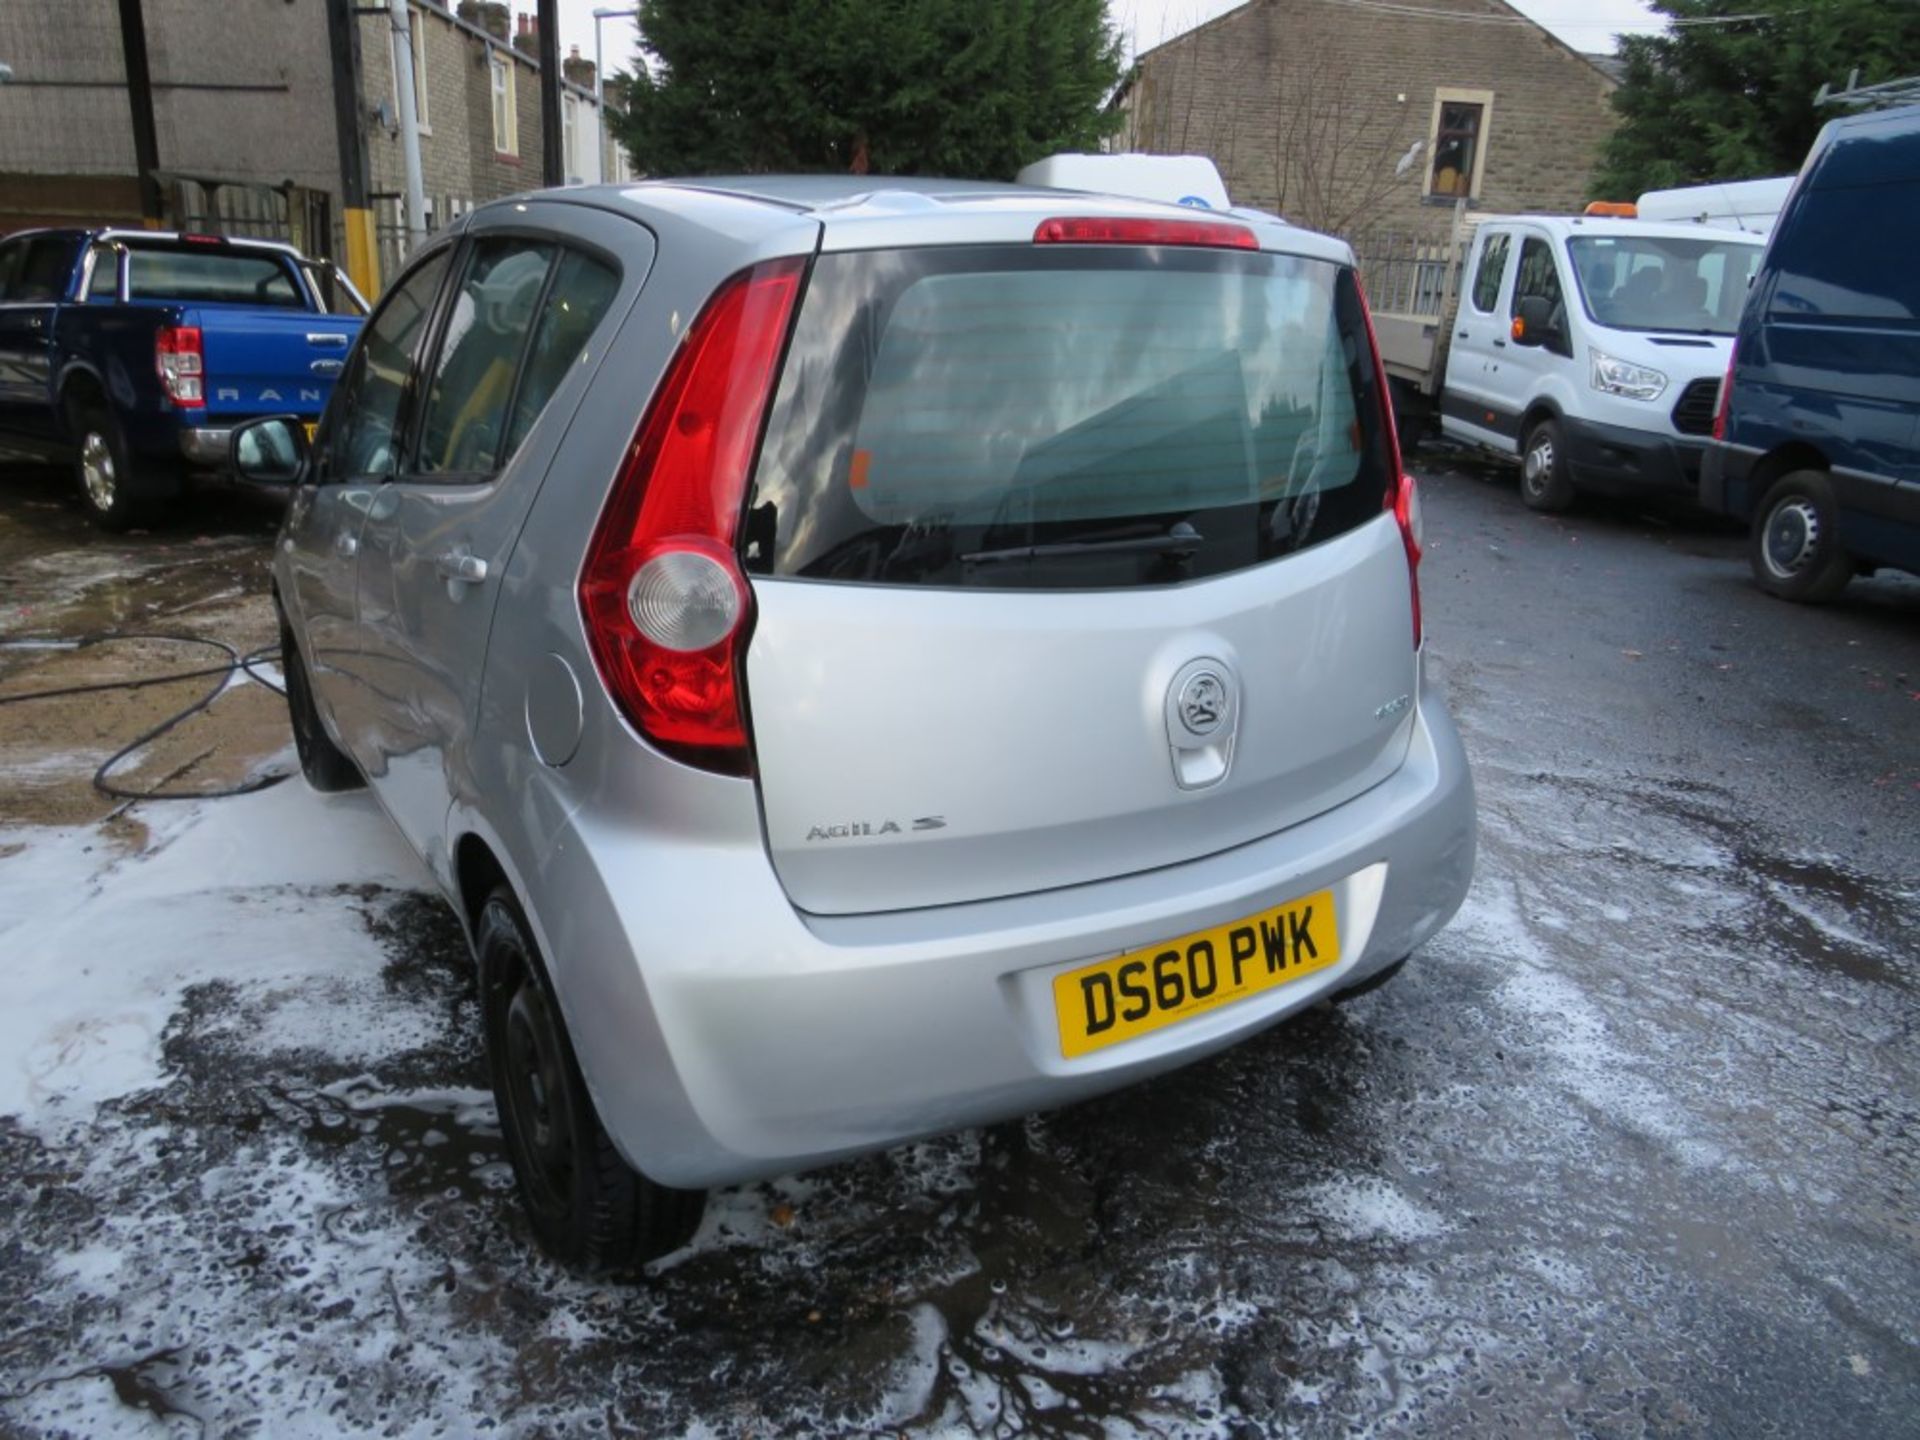 60 reg VAUXHALL AGILA S ECOFLEX (DIRECT COUNCIL) 1ST REG 12/10, 96993M, V5 HERE, 1 OWNER FROM NEW [ - Image 3 of 5